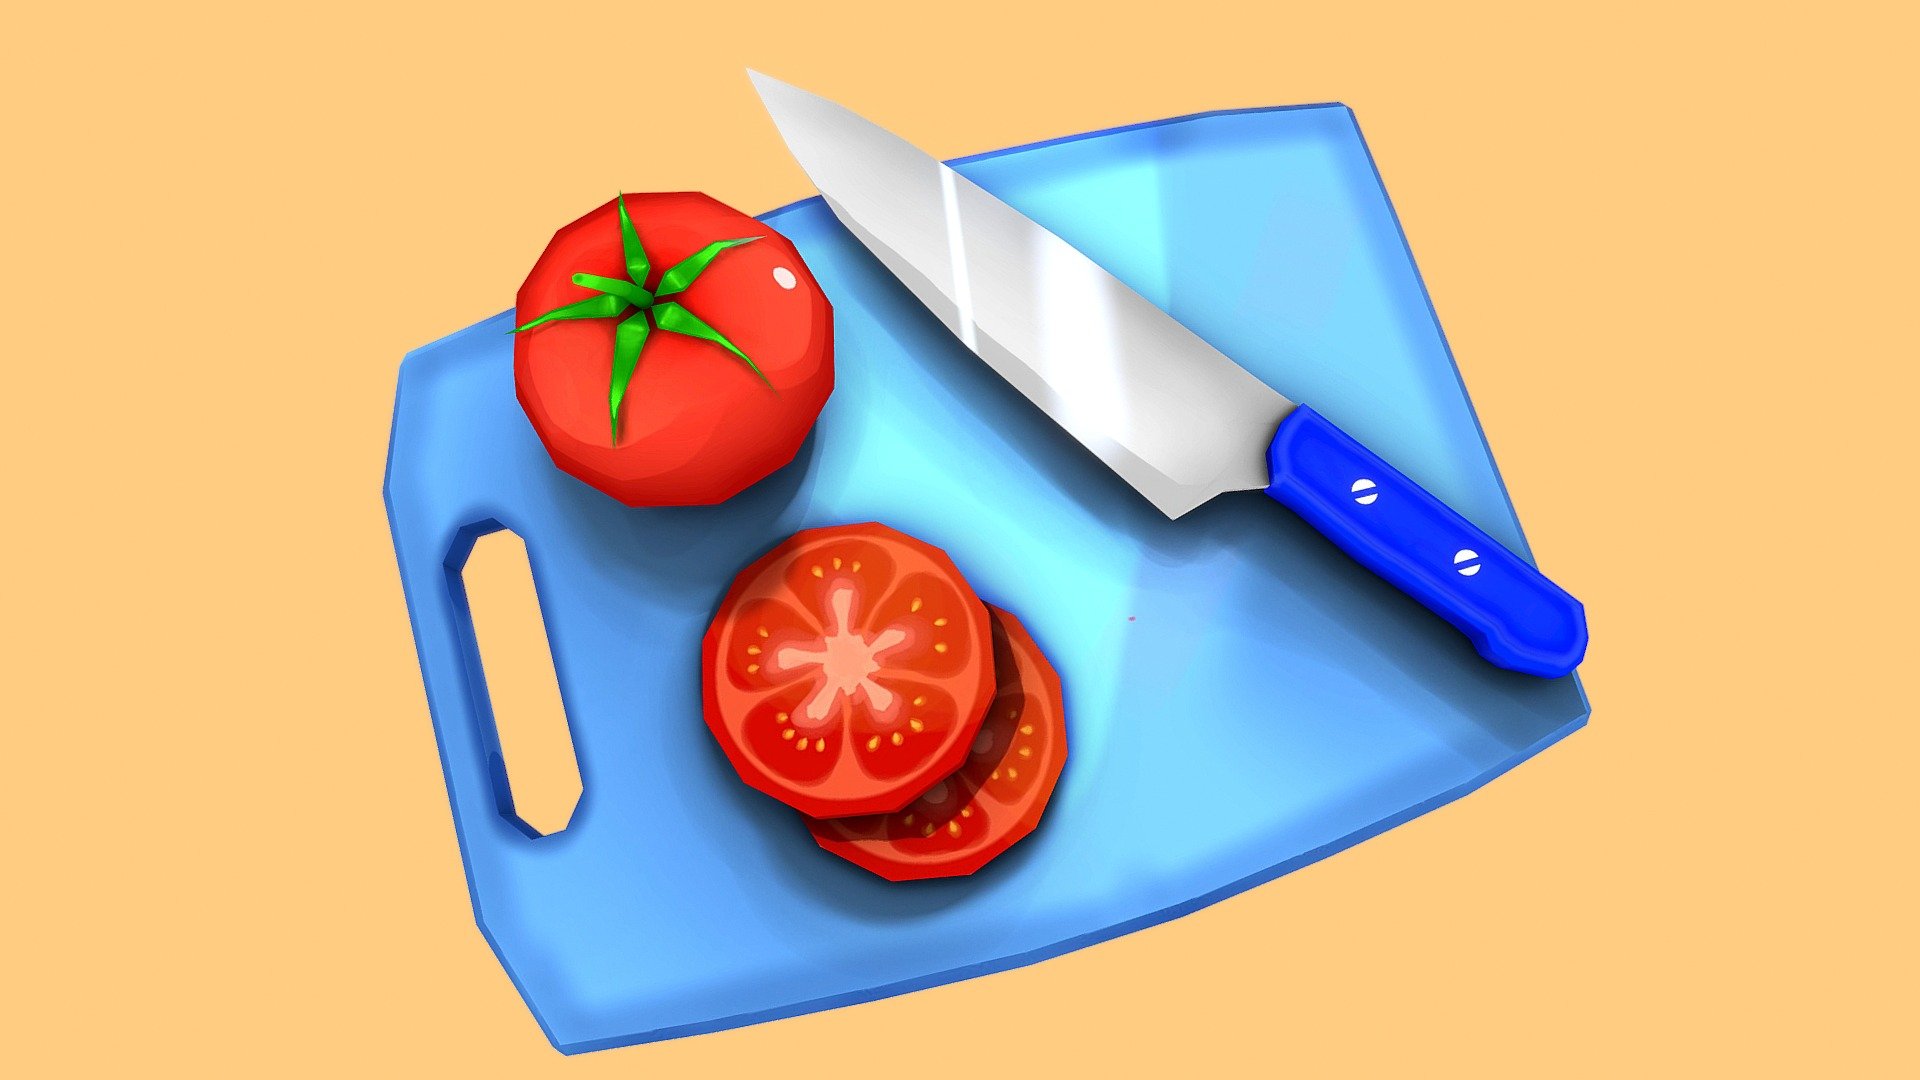 Stylized Tomato Slices On A Cutting Board